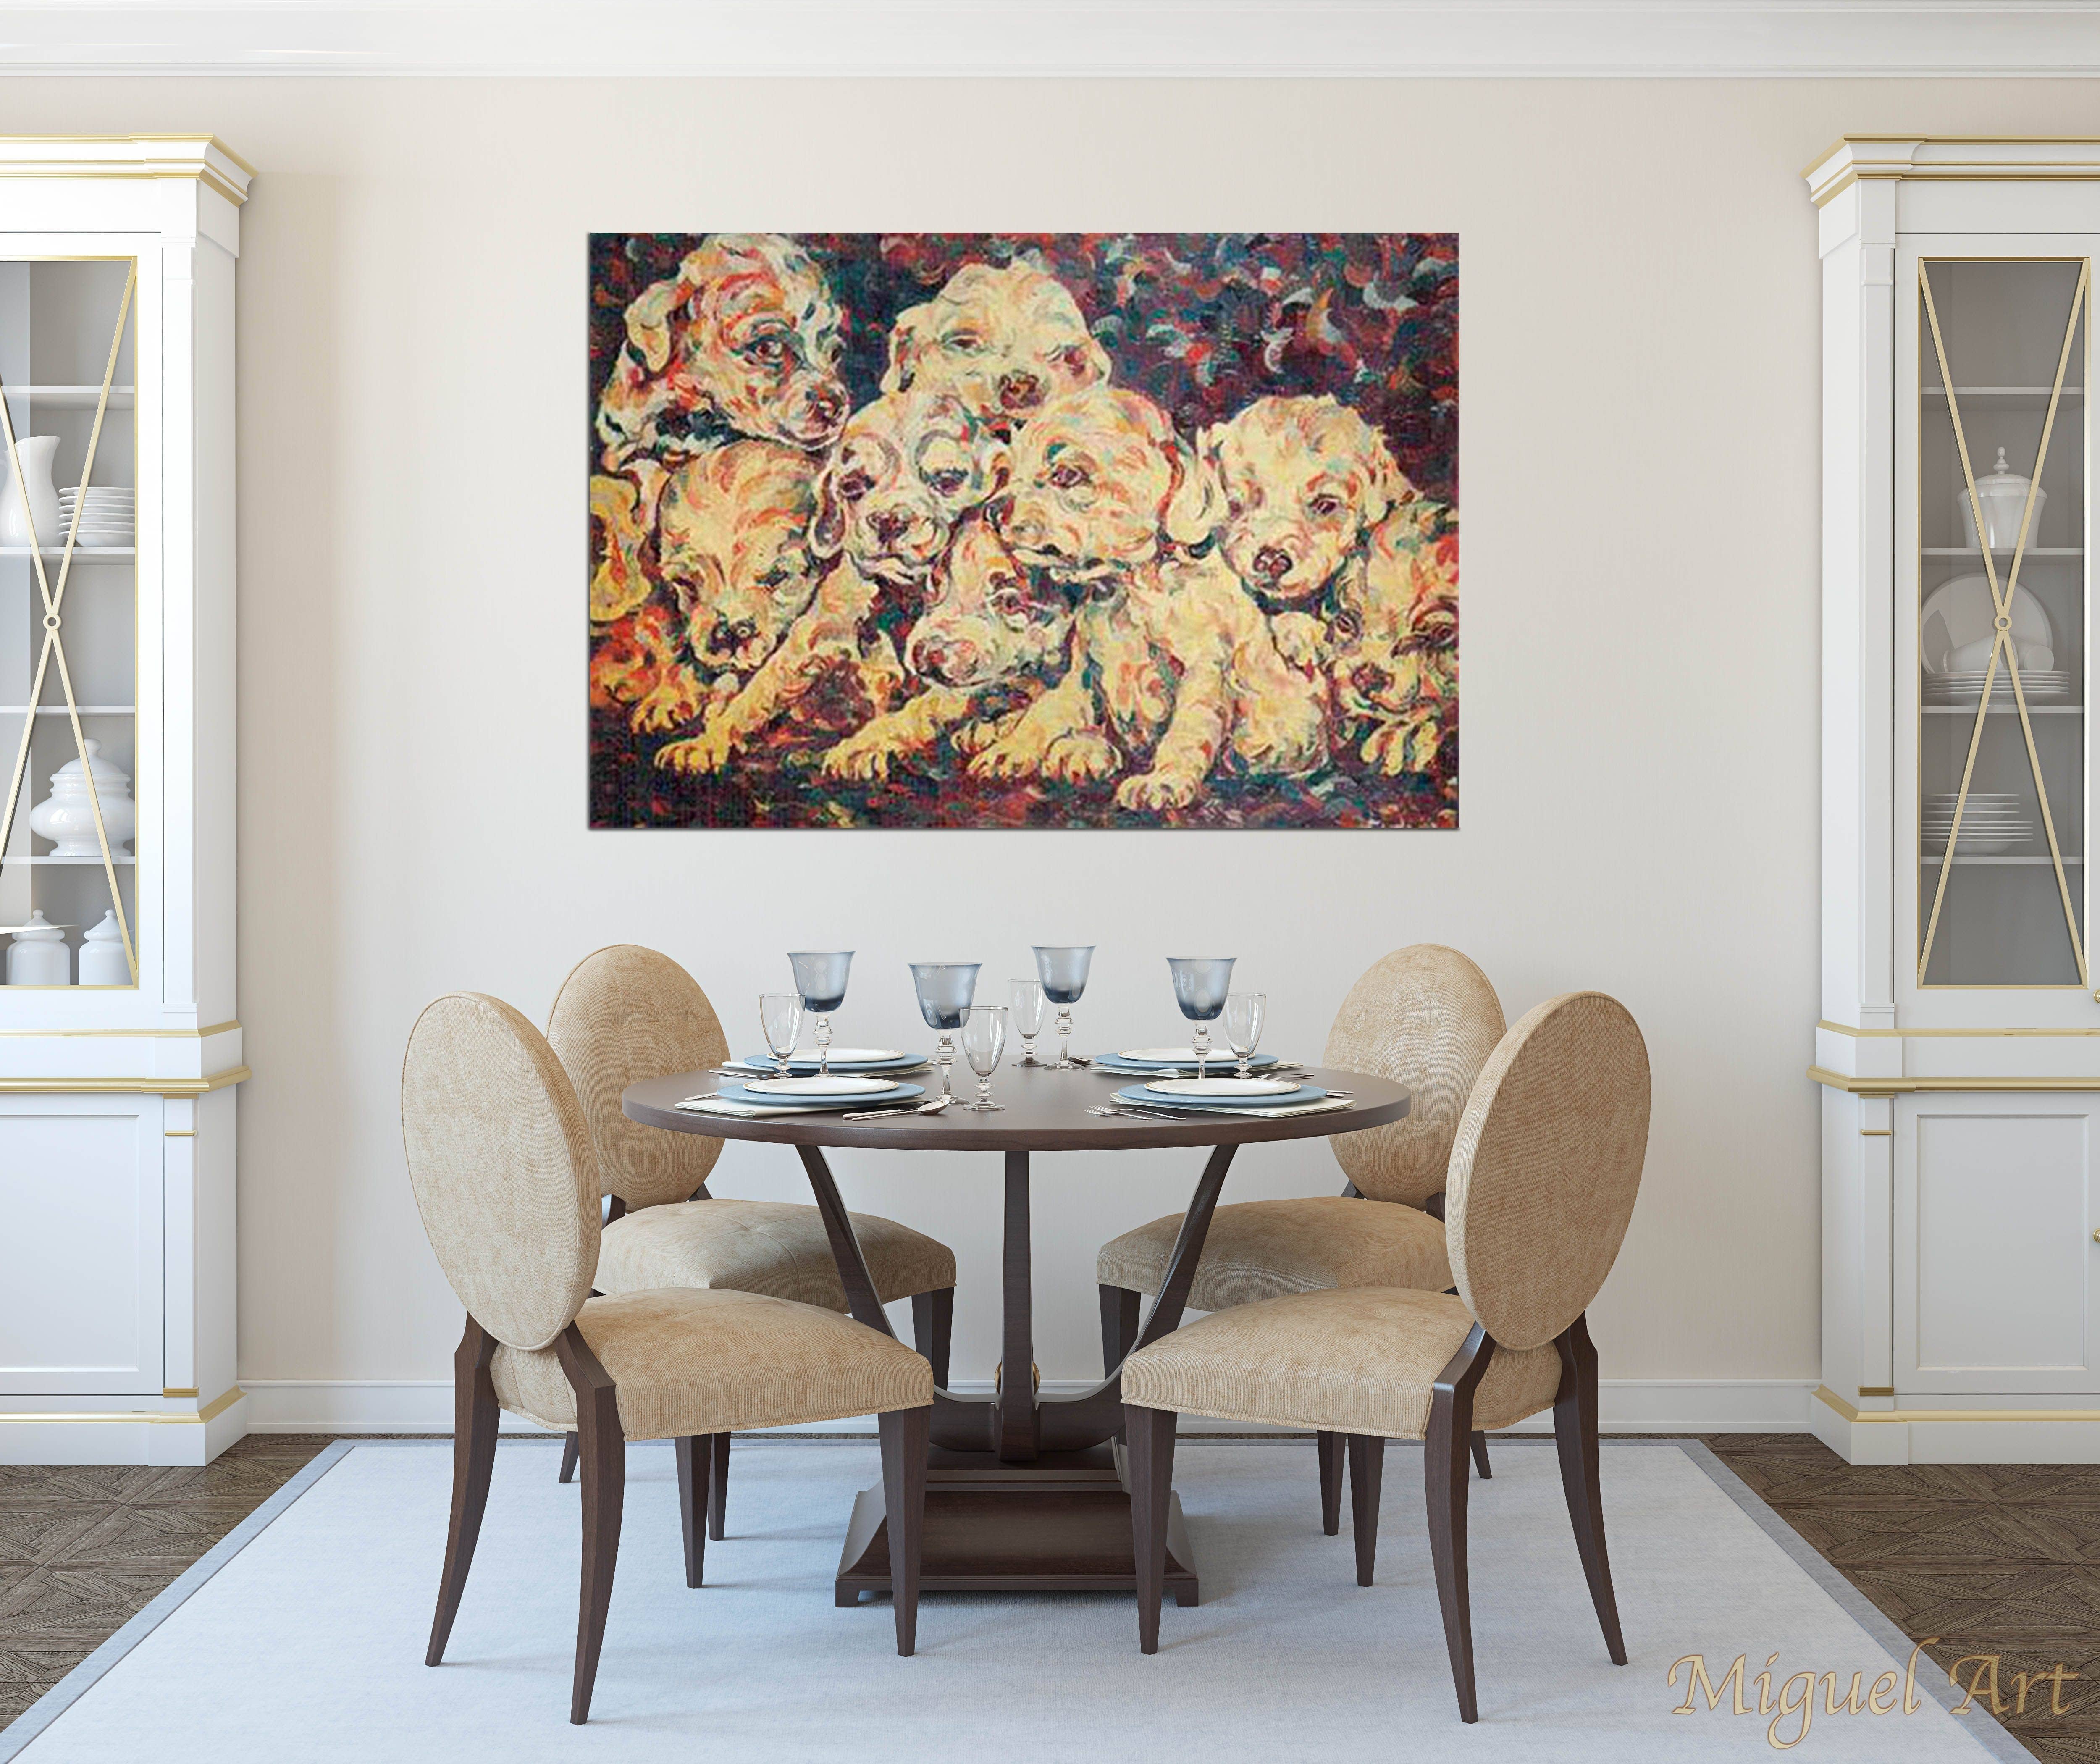 Painting of Nine displayed in a dining room on a cream wall